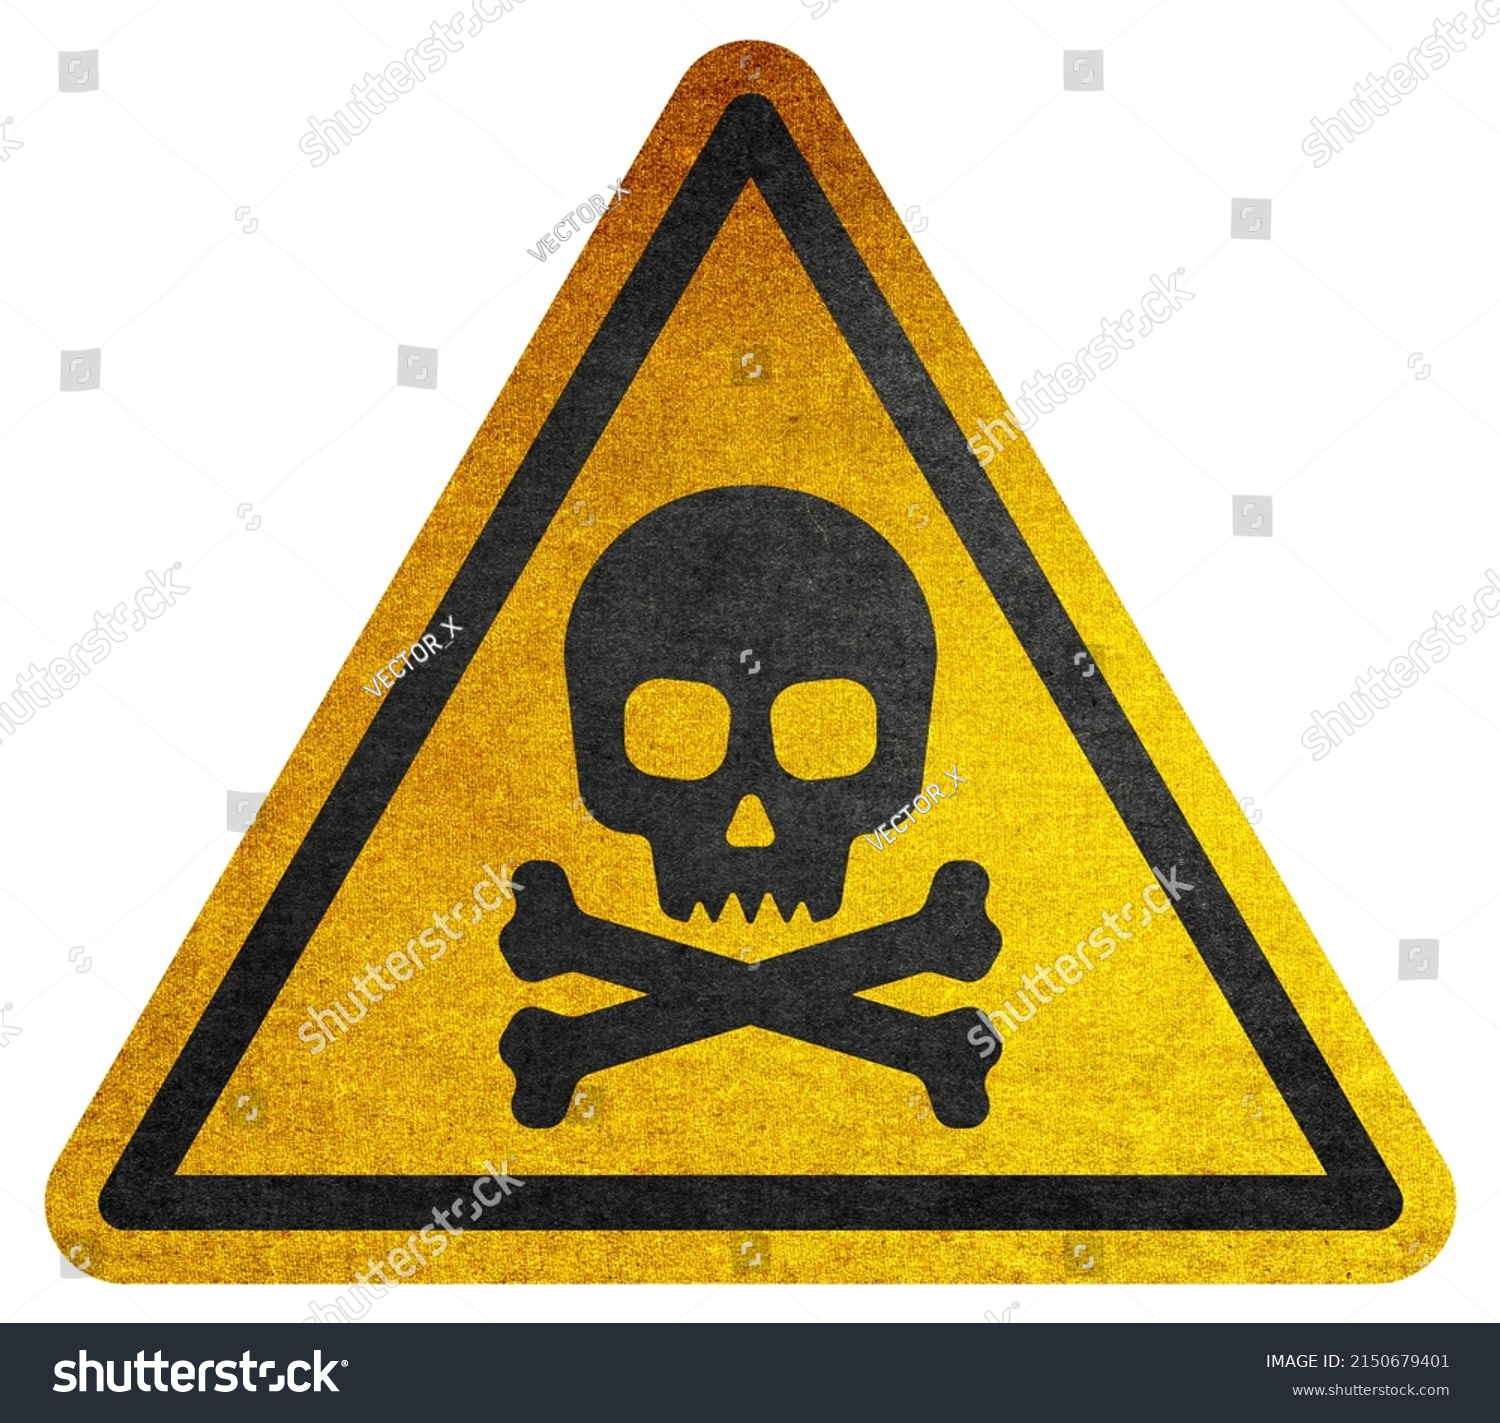 Yellow triangular sign. Grungy style danger sign with skull and cross bones on white background. Rusty. Warning. Caution. Hazard. Danger. Worn out.  #2150679401